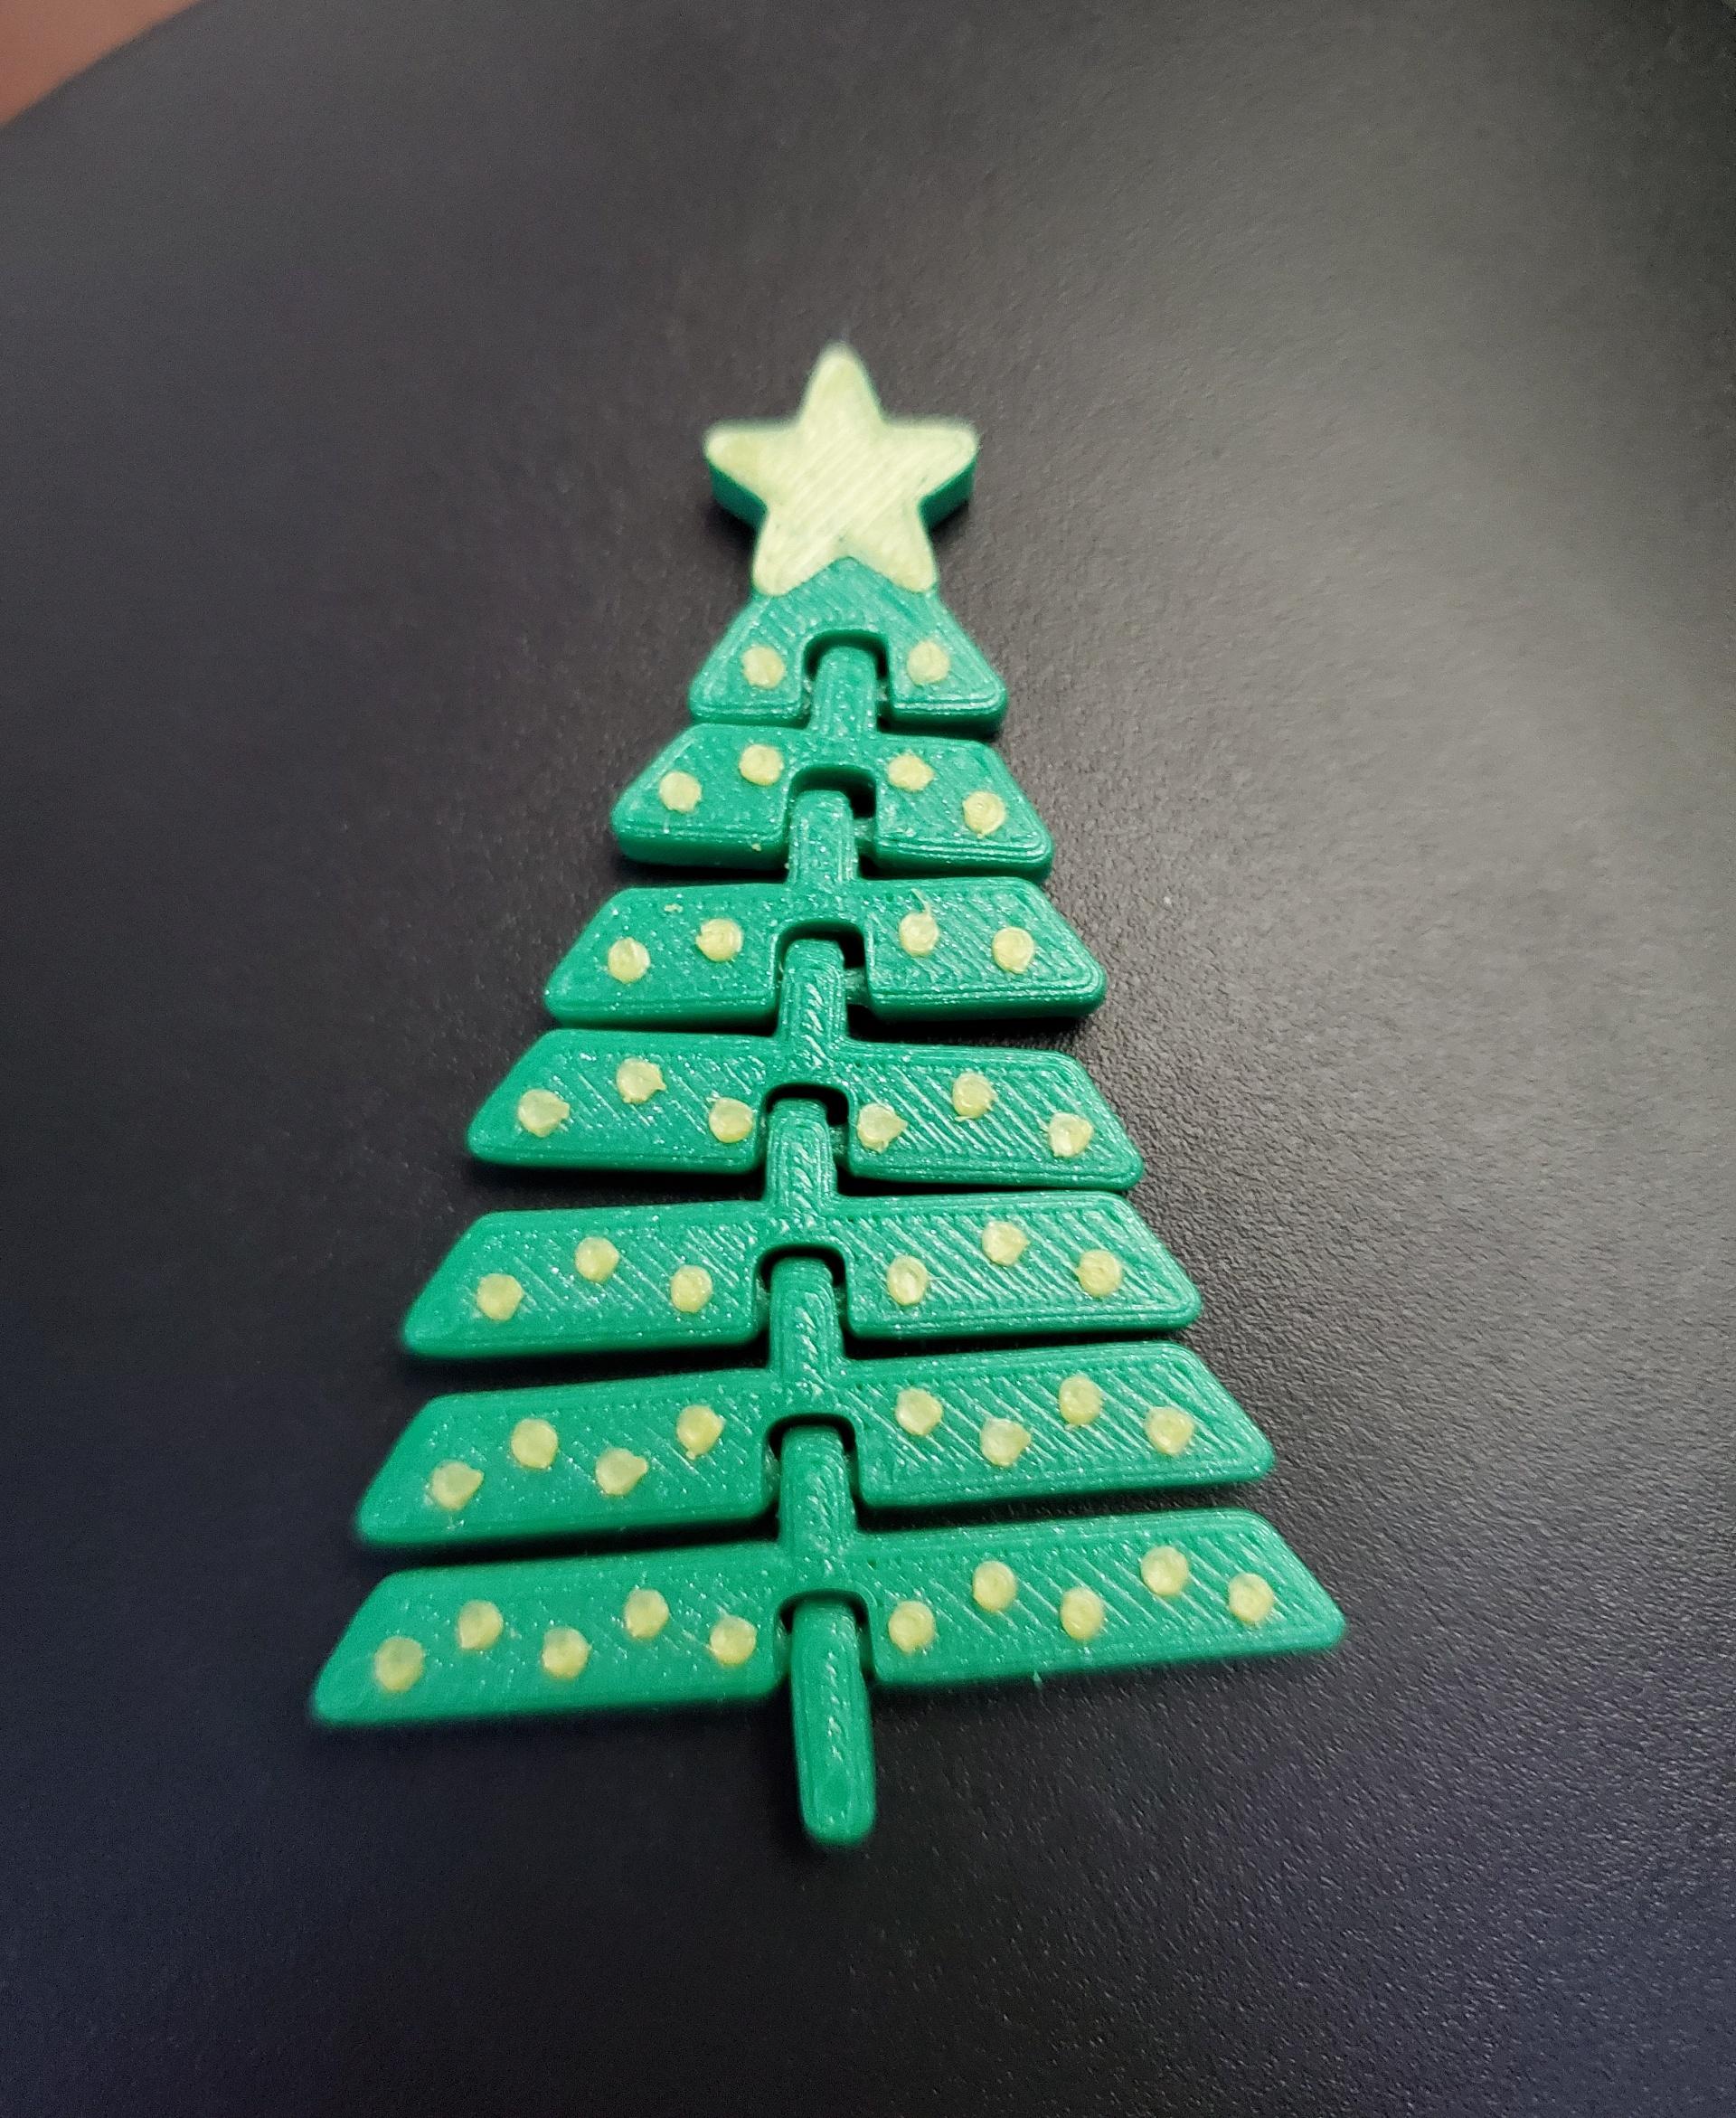 Articulated Christmas Tree with Star and Ornaments - Print in place fidget toys - 3mf - polymaker green pla - 3d model